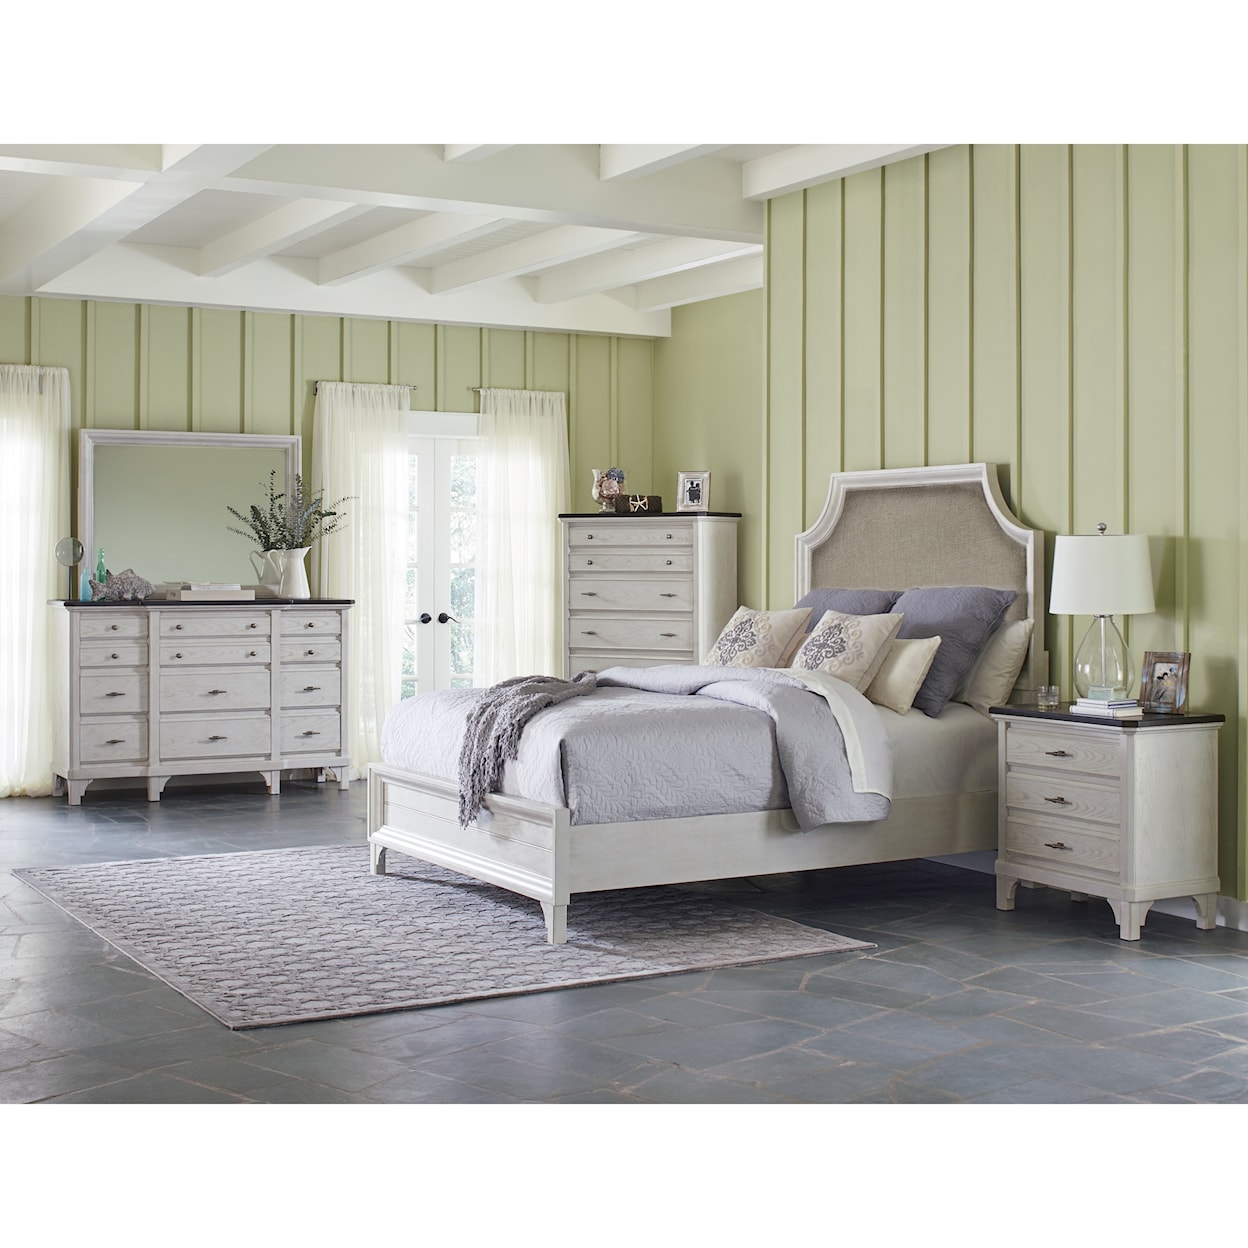 Avalon Furniture Mystic Cay King Bedroom Group